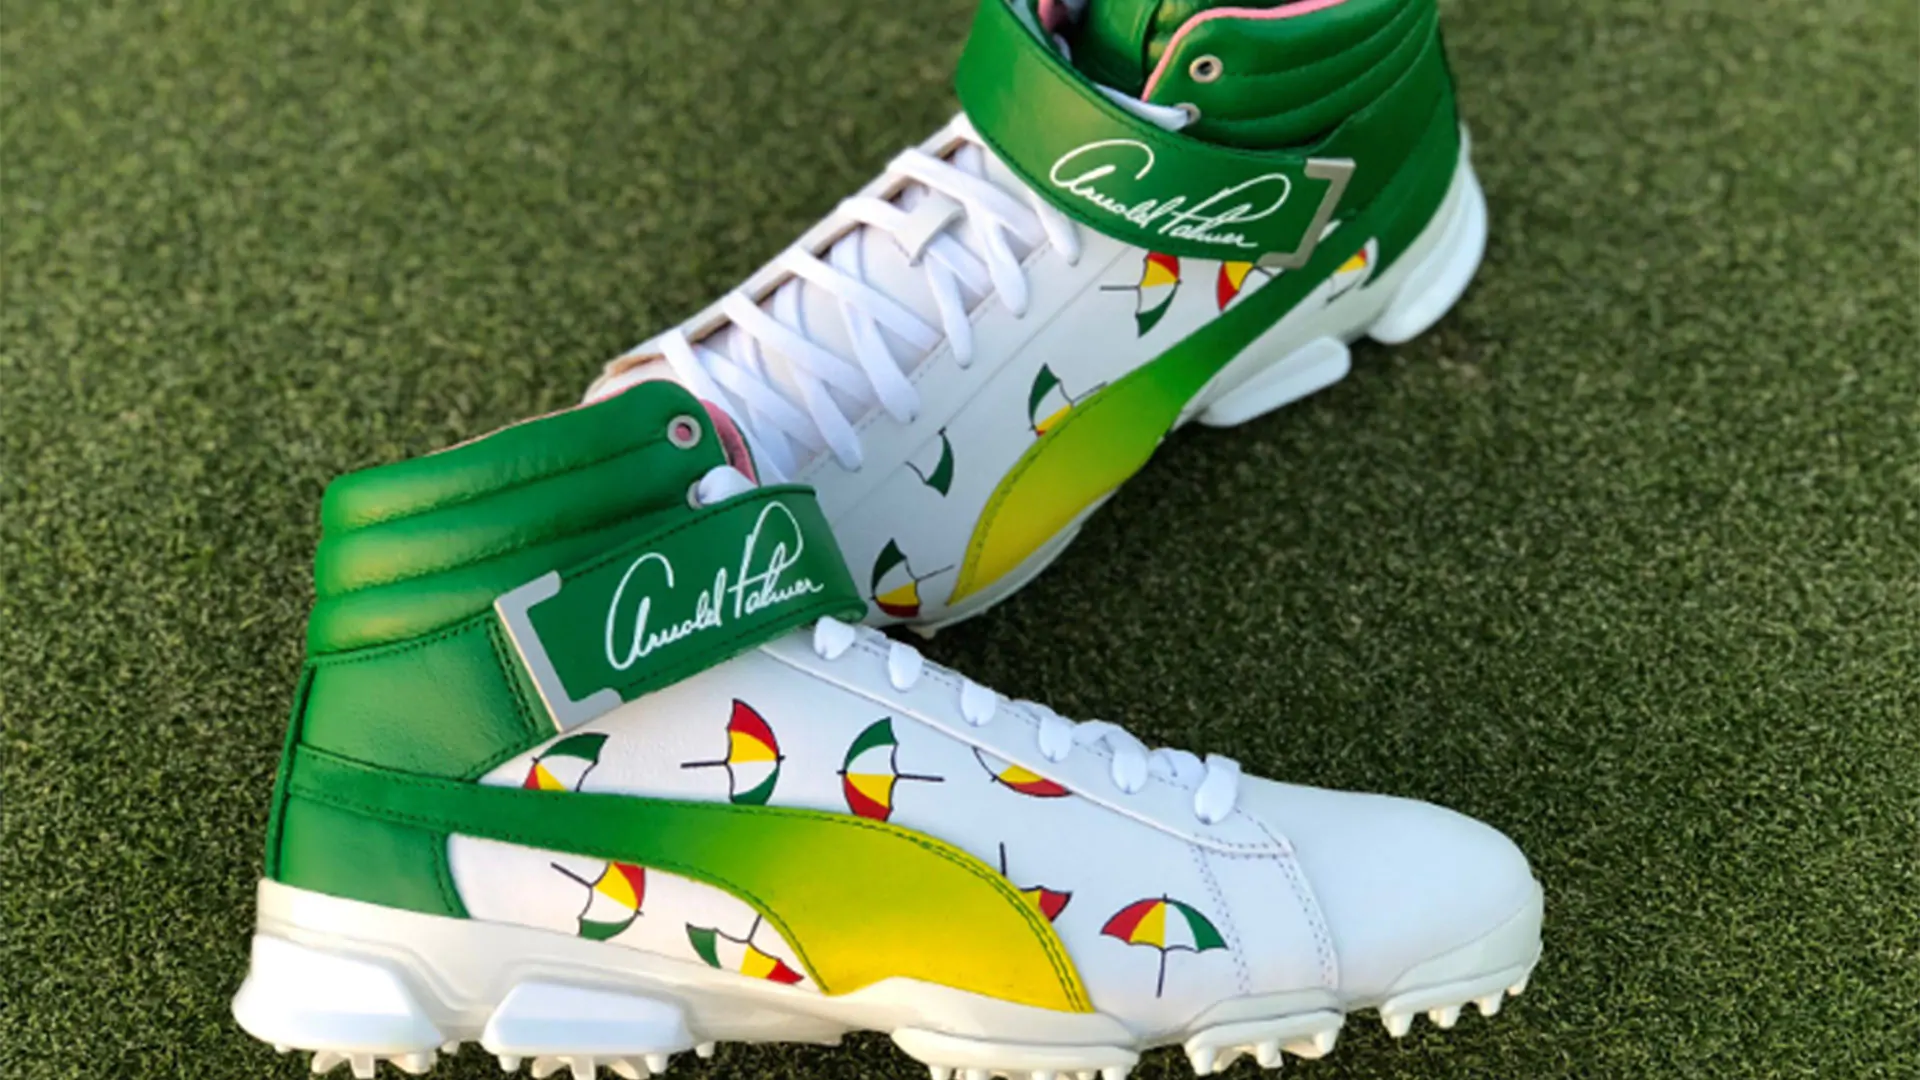 Fowler honoring Palmer with incredible Arnie-themed shoes